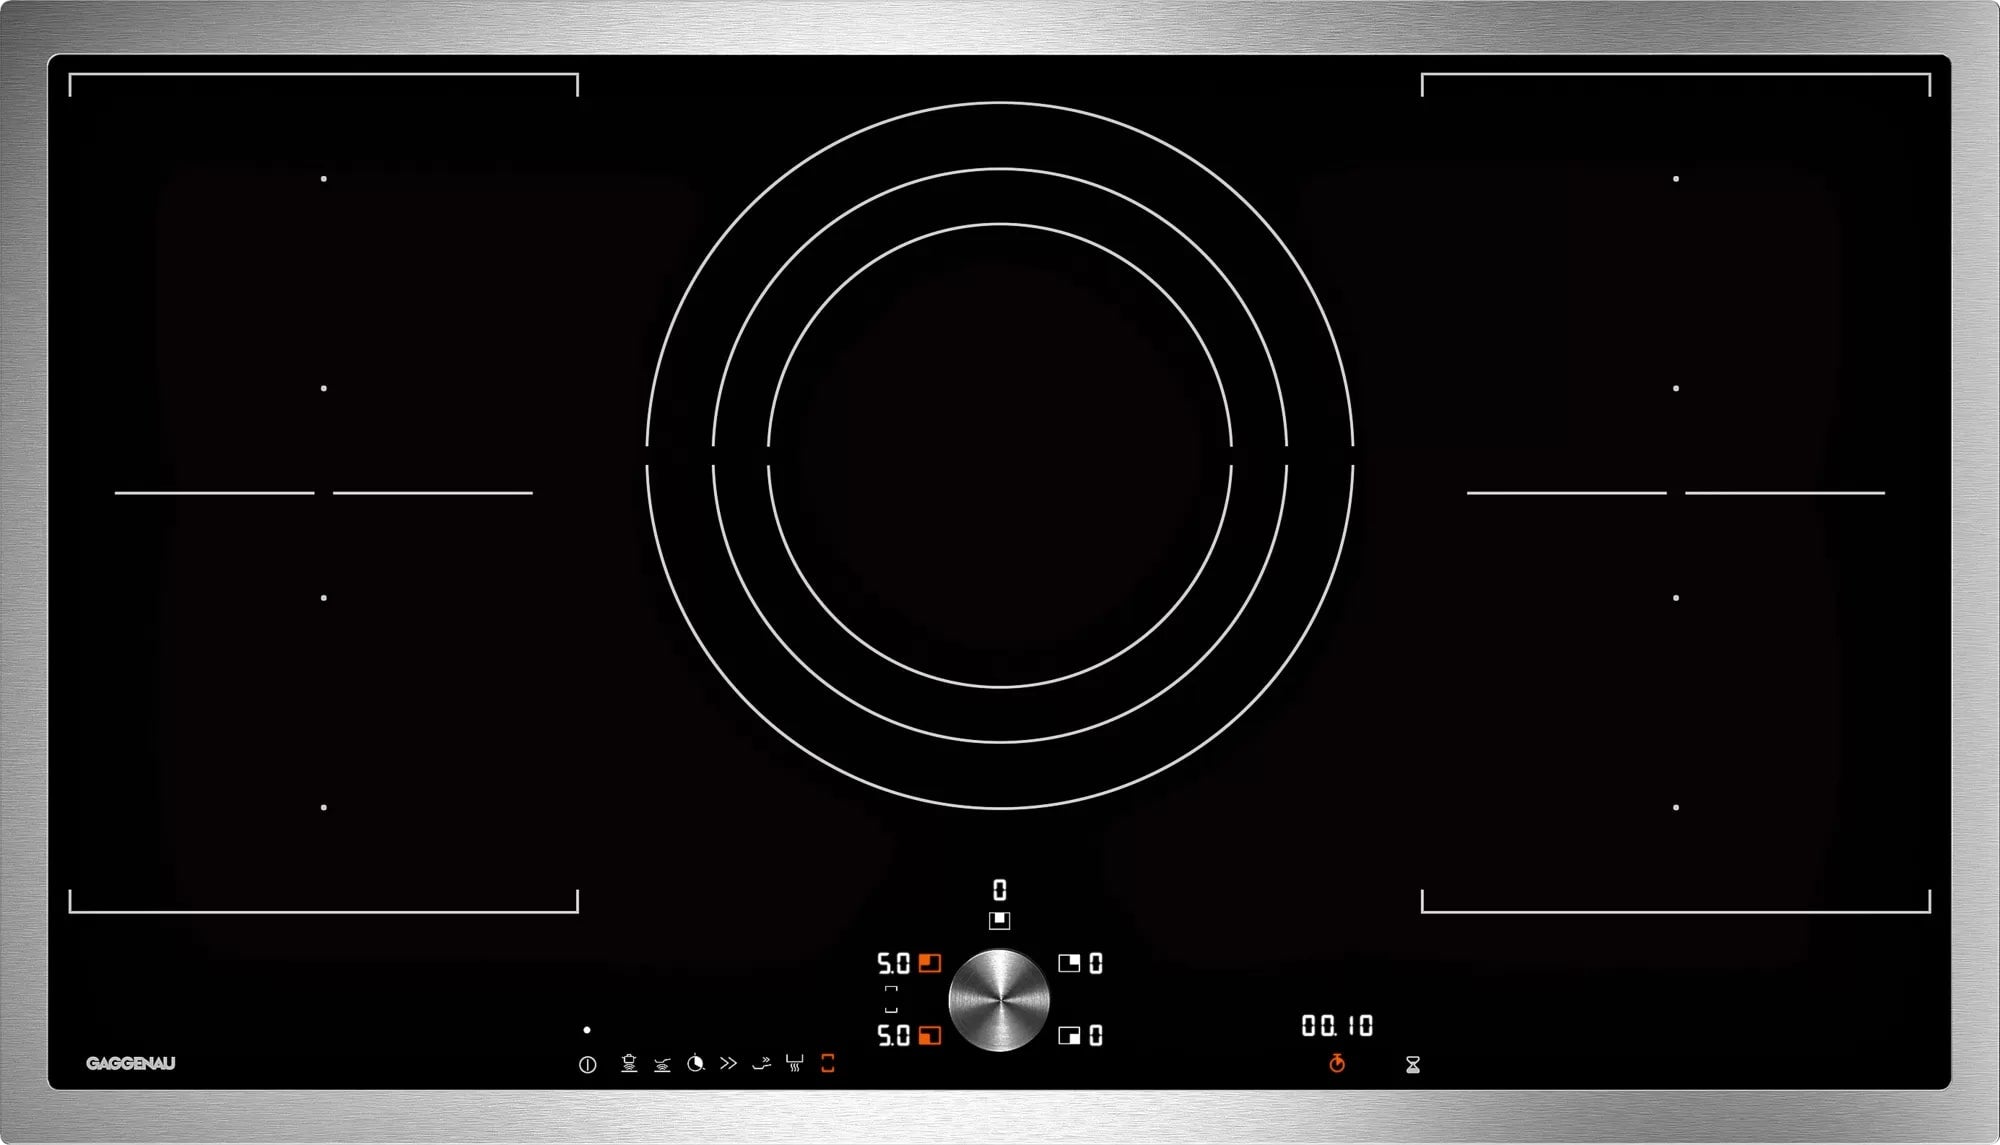 Gaggenau - 35.75 inch wide Induction Cooktop in Stainless - CI292610